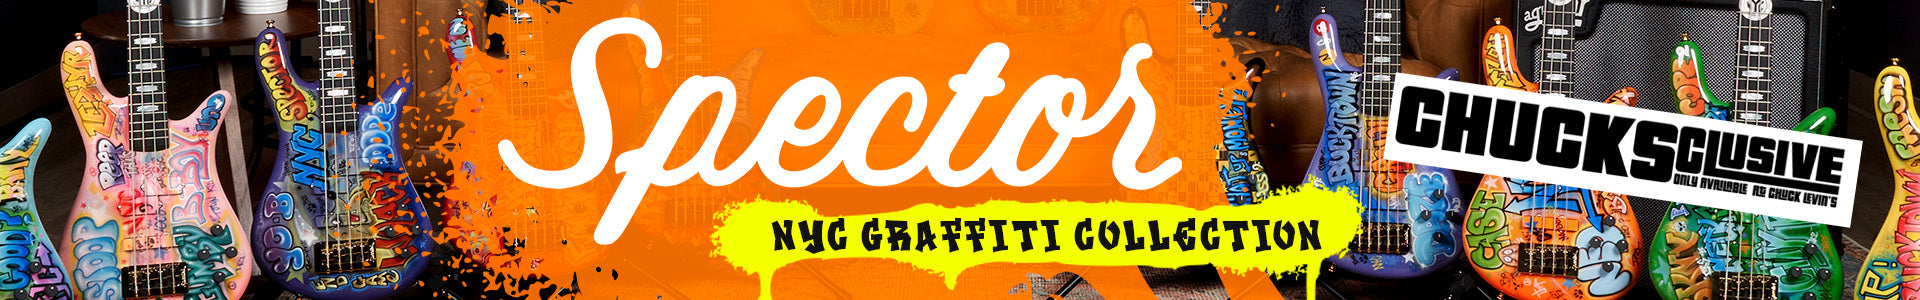 Spector NYC Graffiti Collection Banner